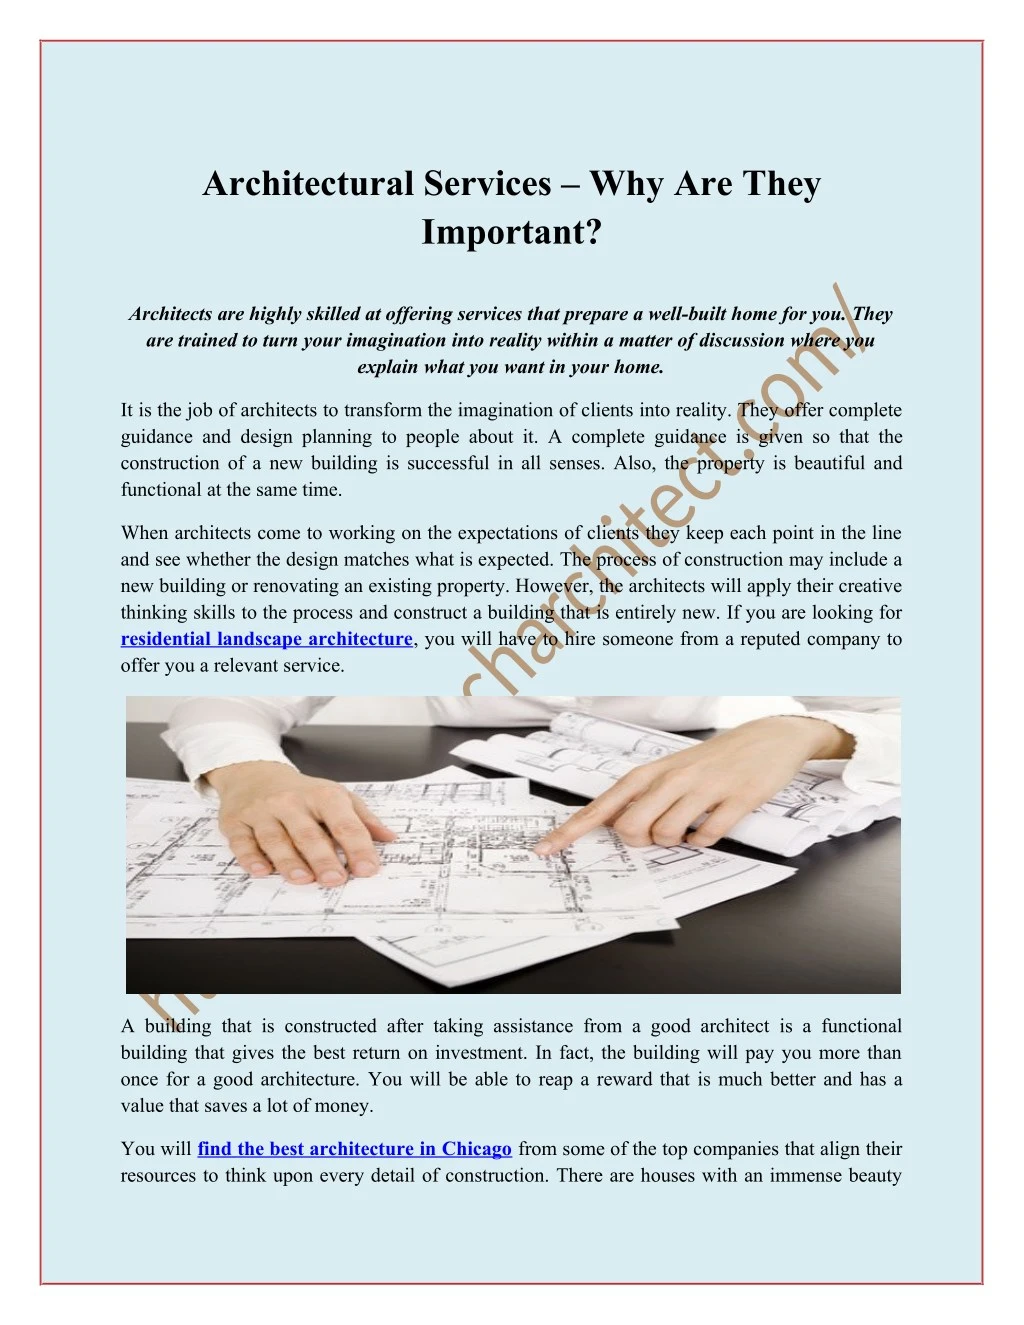 architectural services why are they important